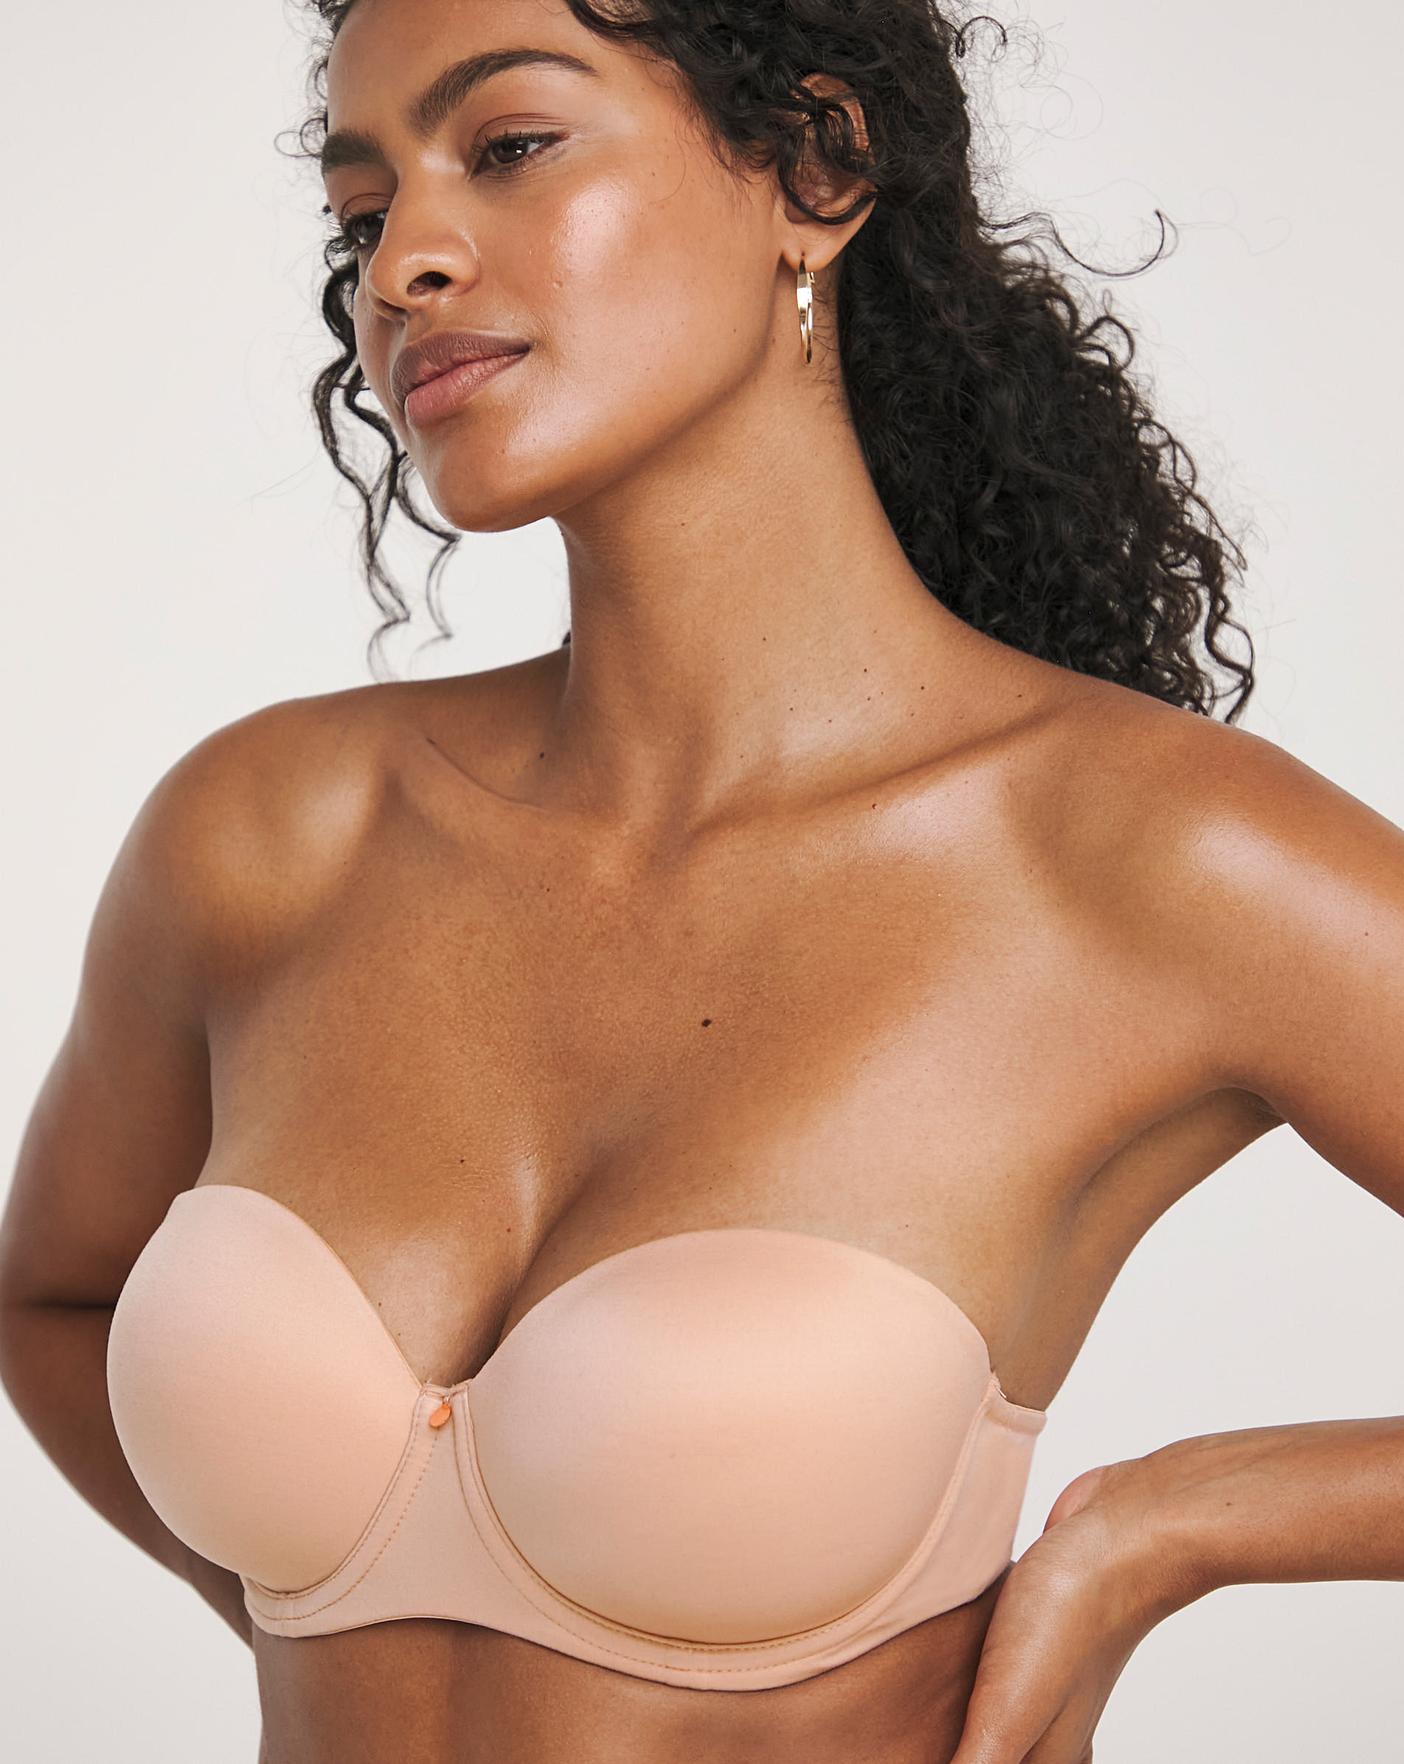 Figleaves Smoothing Multiway Balcony Bra